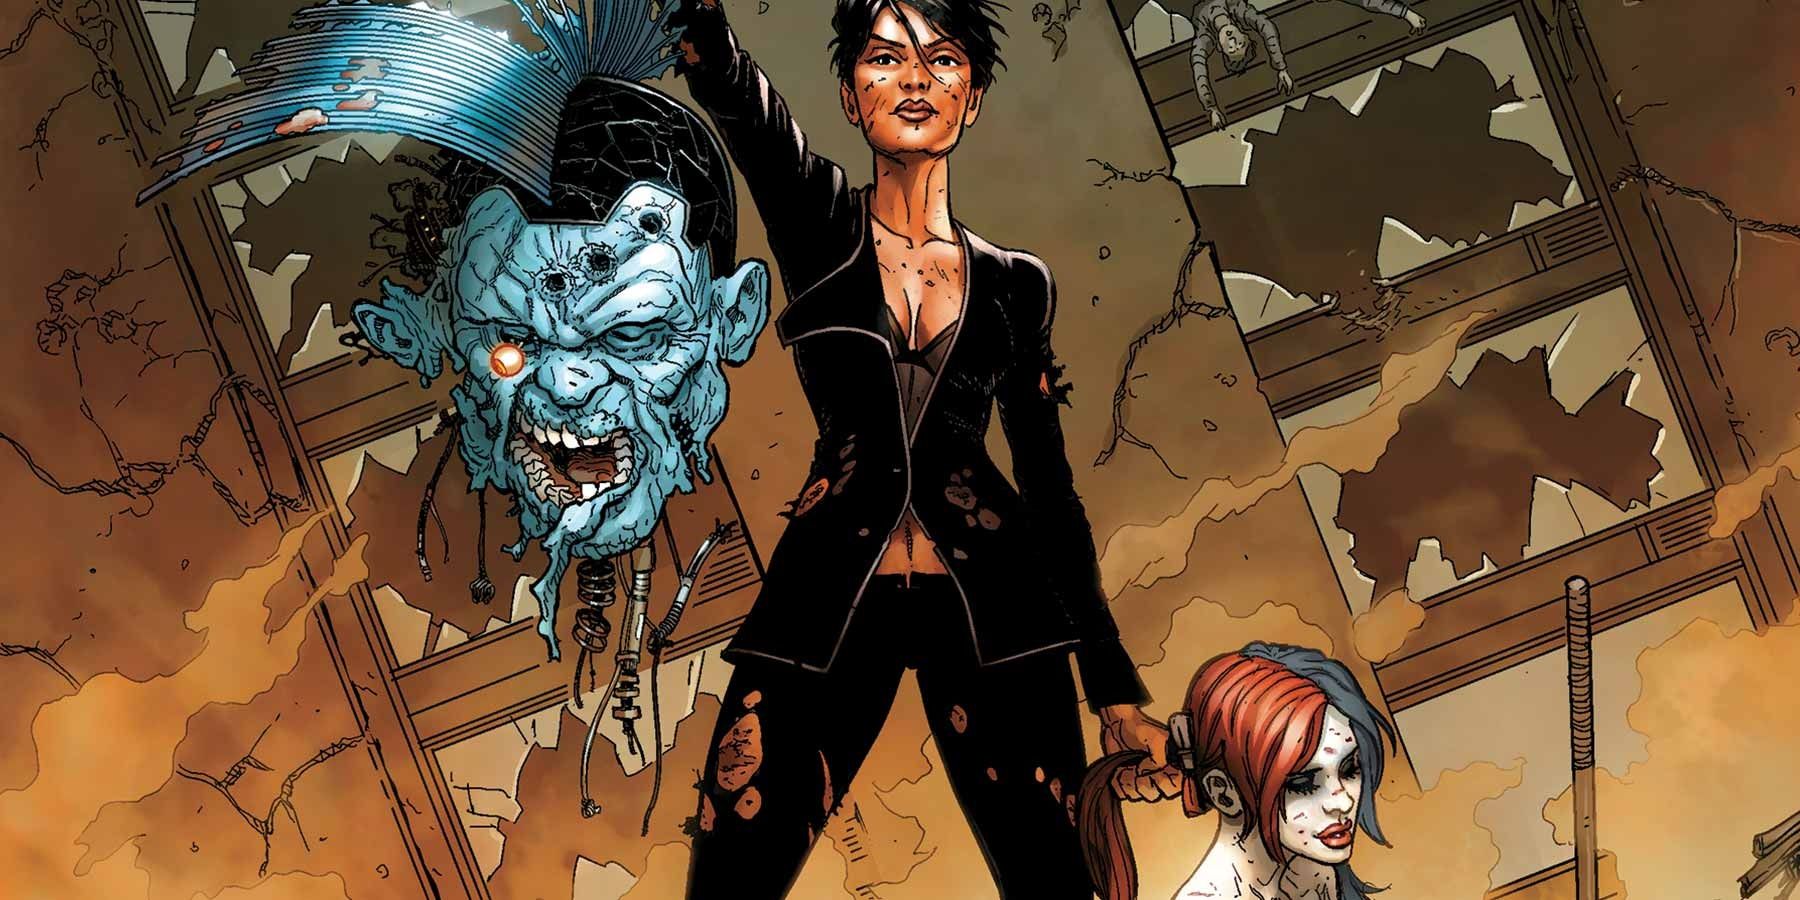 Amanda Waller holds a severed head in DC Comics.